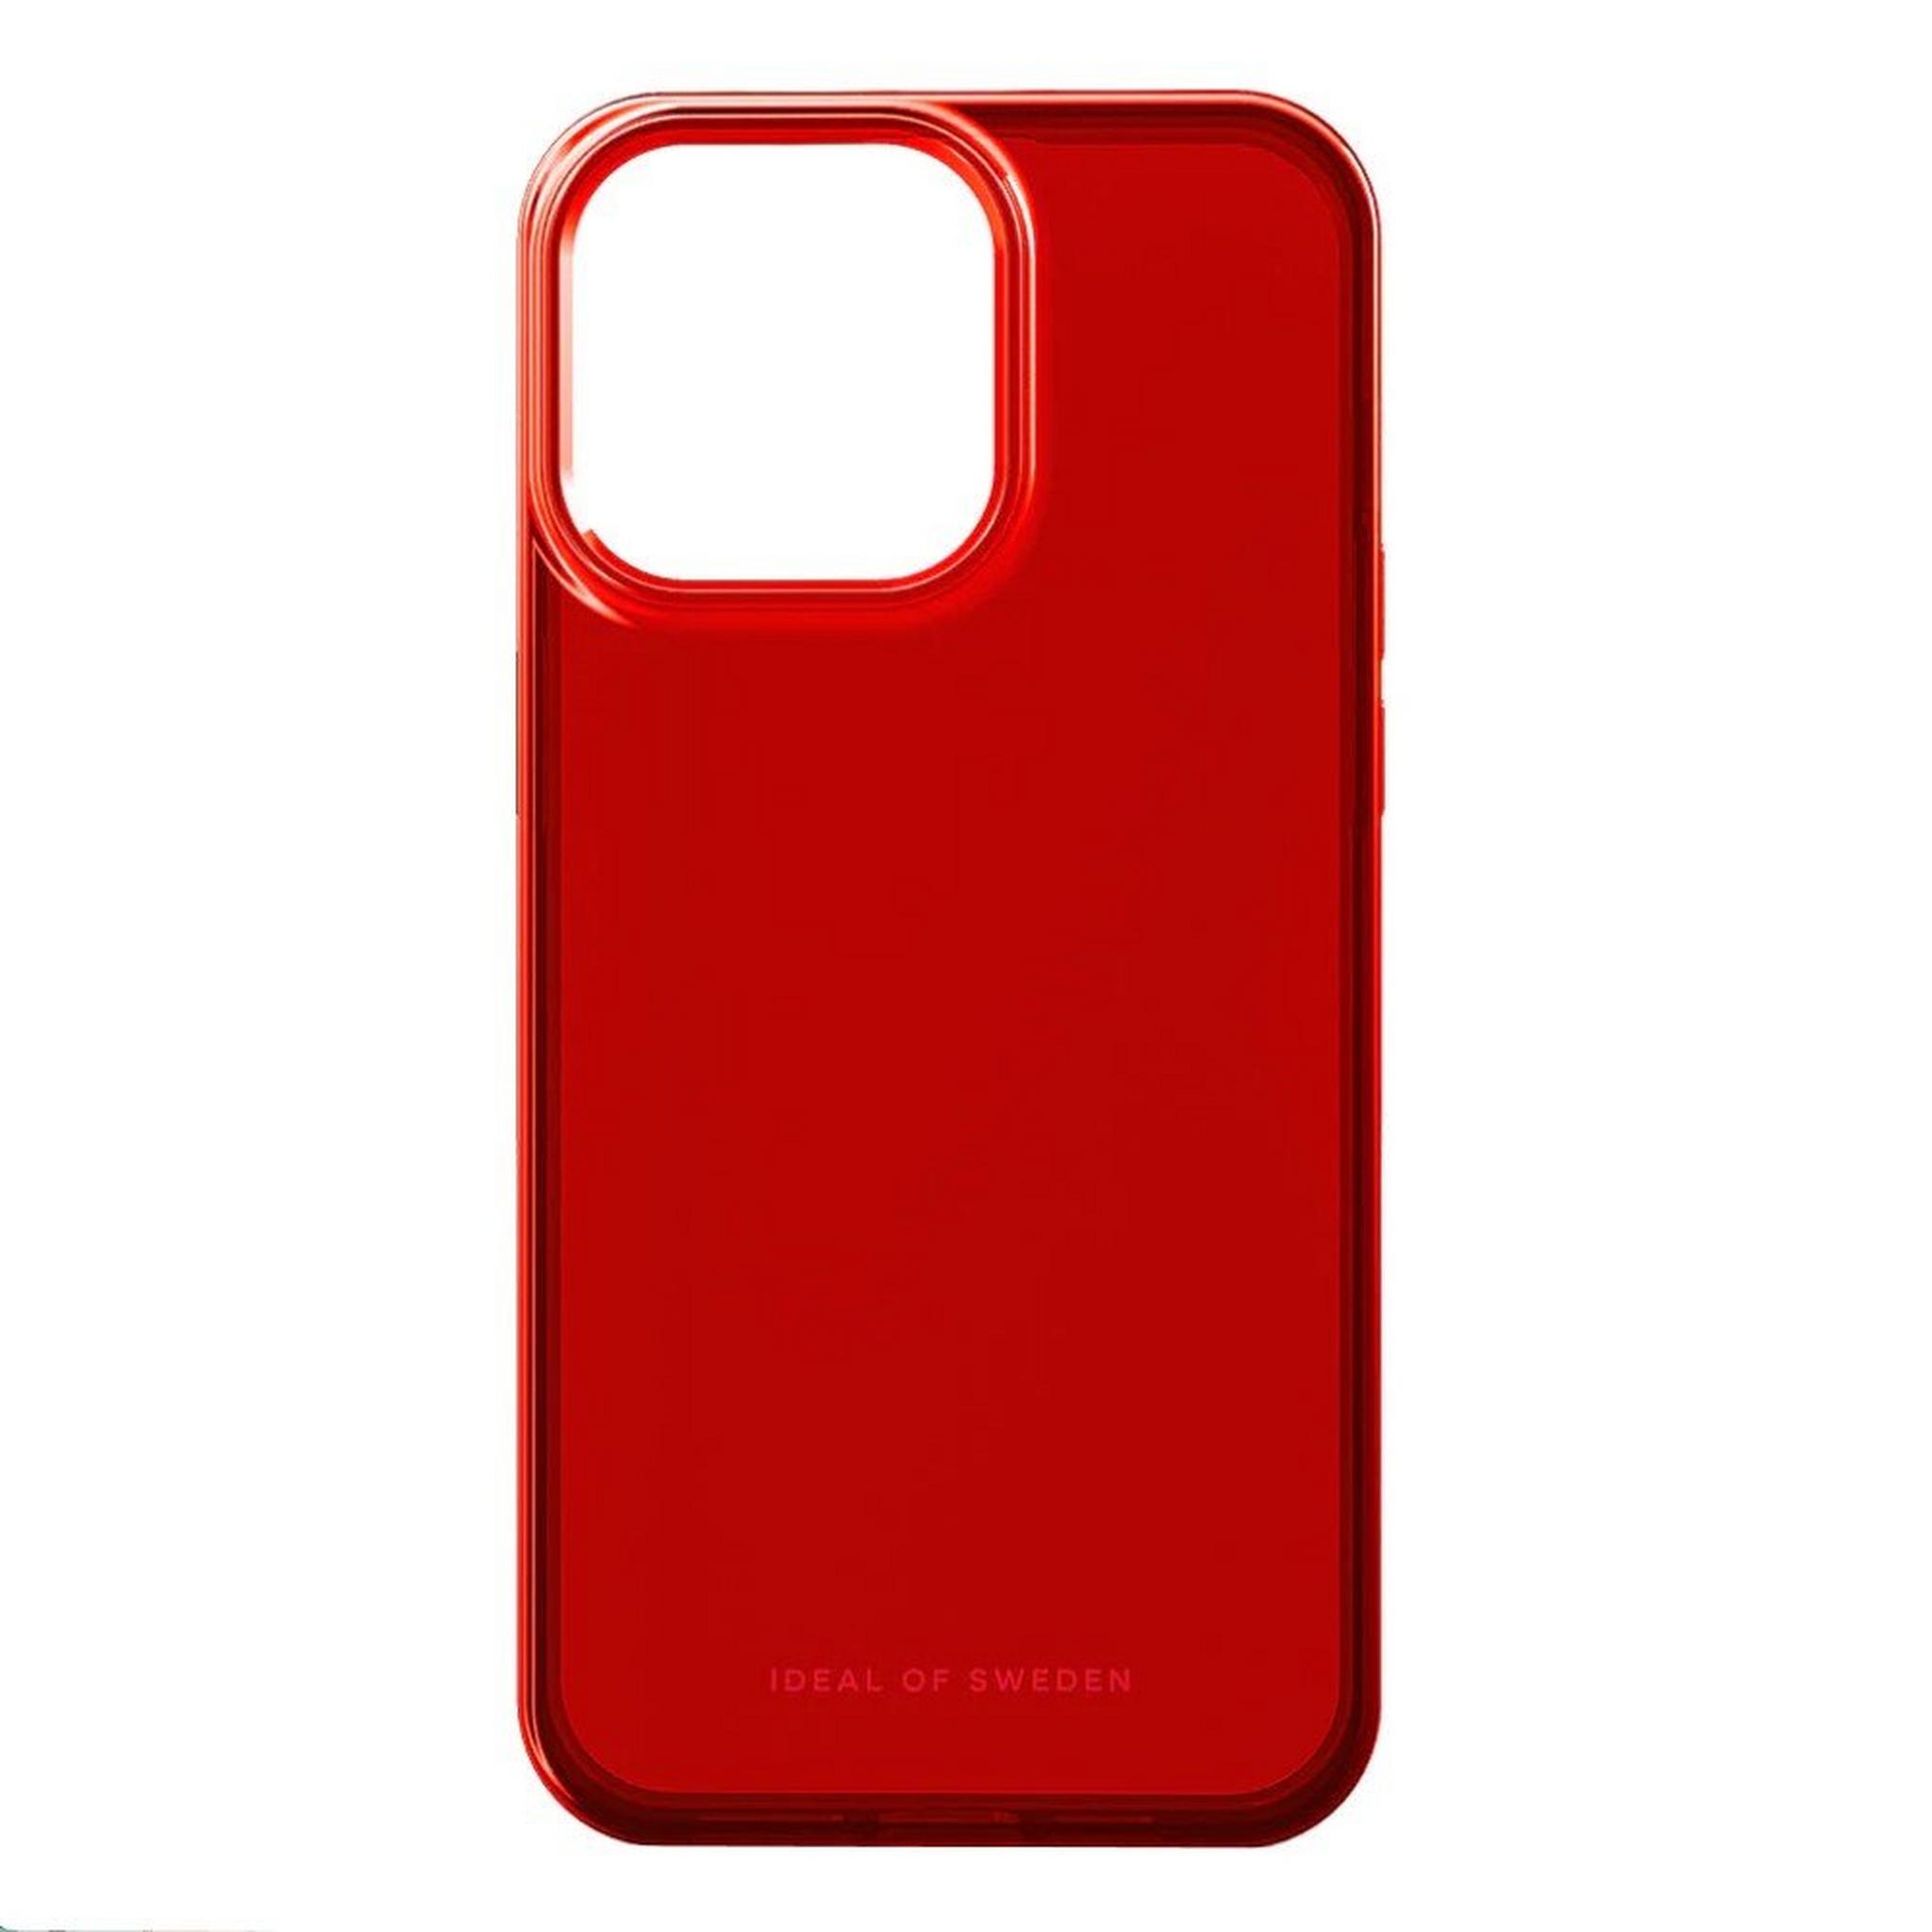 Ideal of Sweden iPhone 15 Pro Max Case - Radiant Red